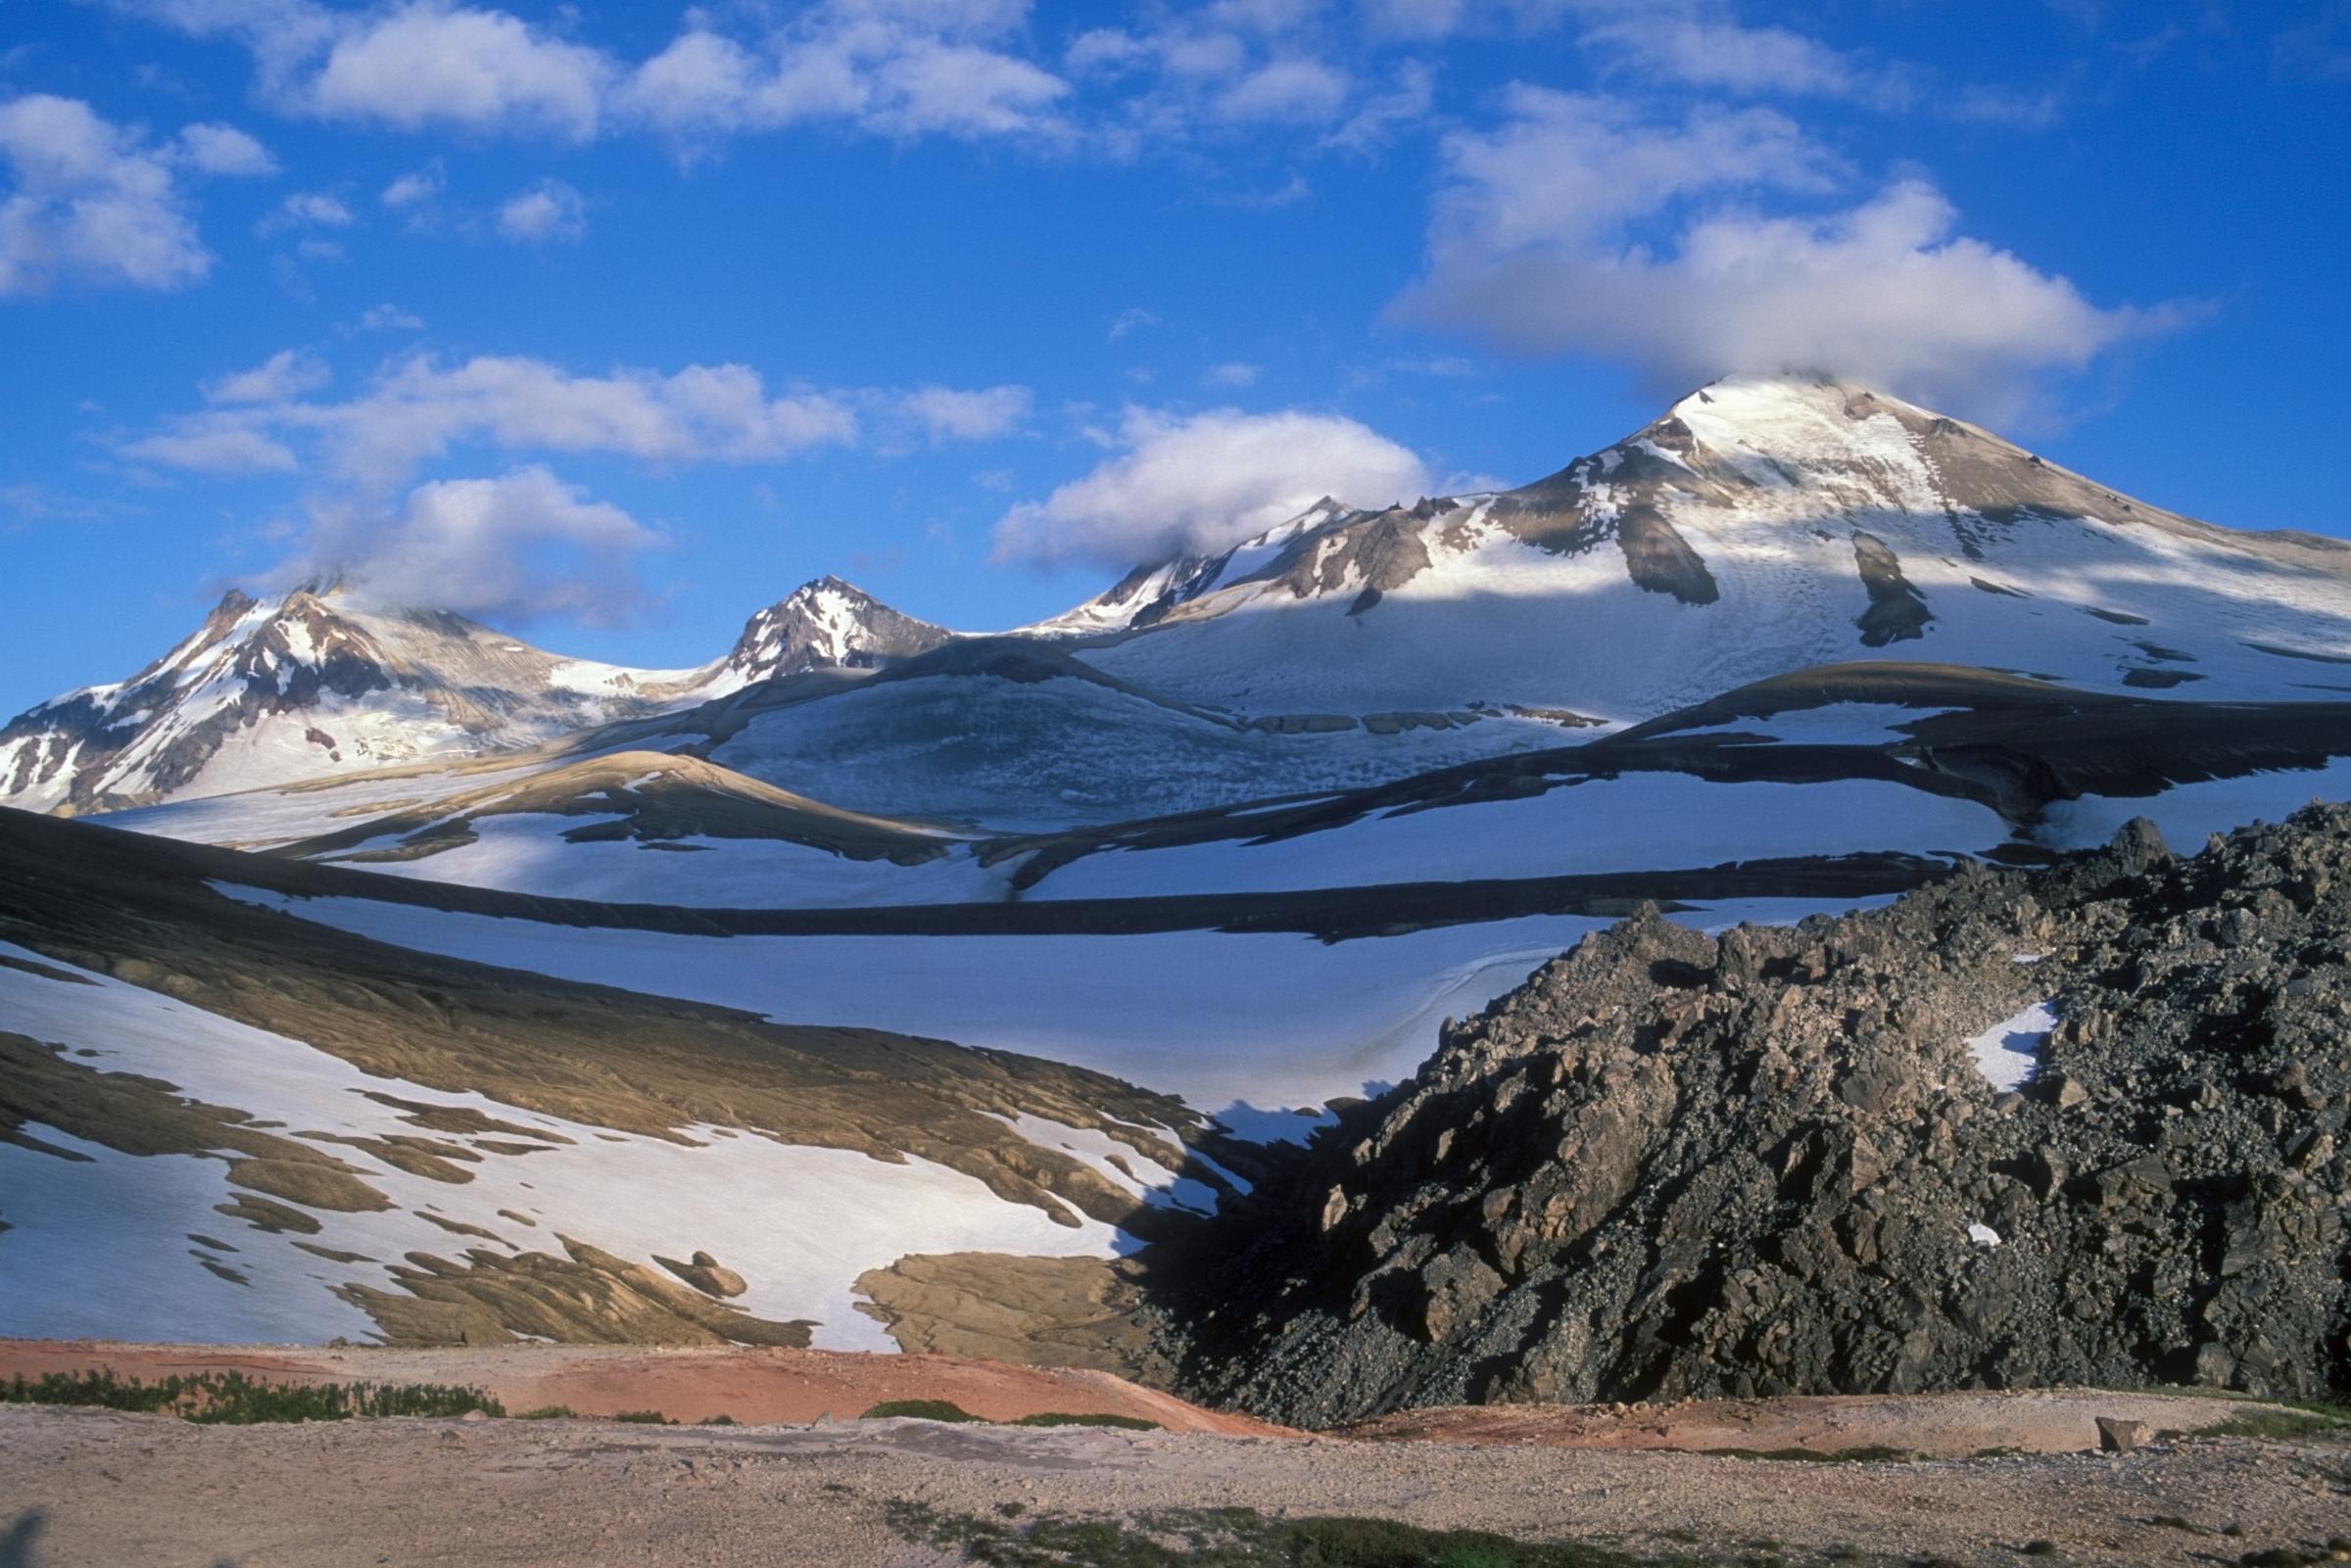 Scenic View Of The Novarupta Volcano Lava Dome With Mount Katmai And Trident Volcanoes In The Background In The Valley Of 10,000 Smokes, Katmai National Park, Alaska